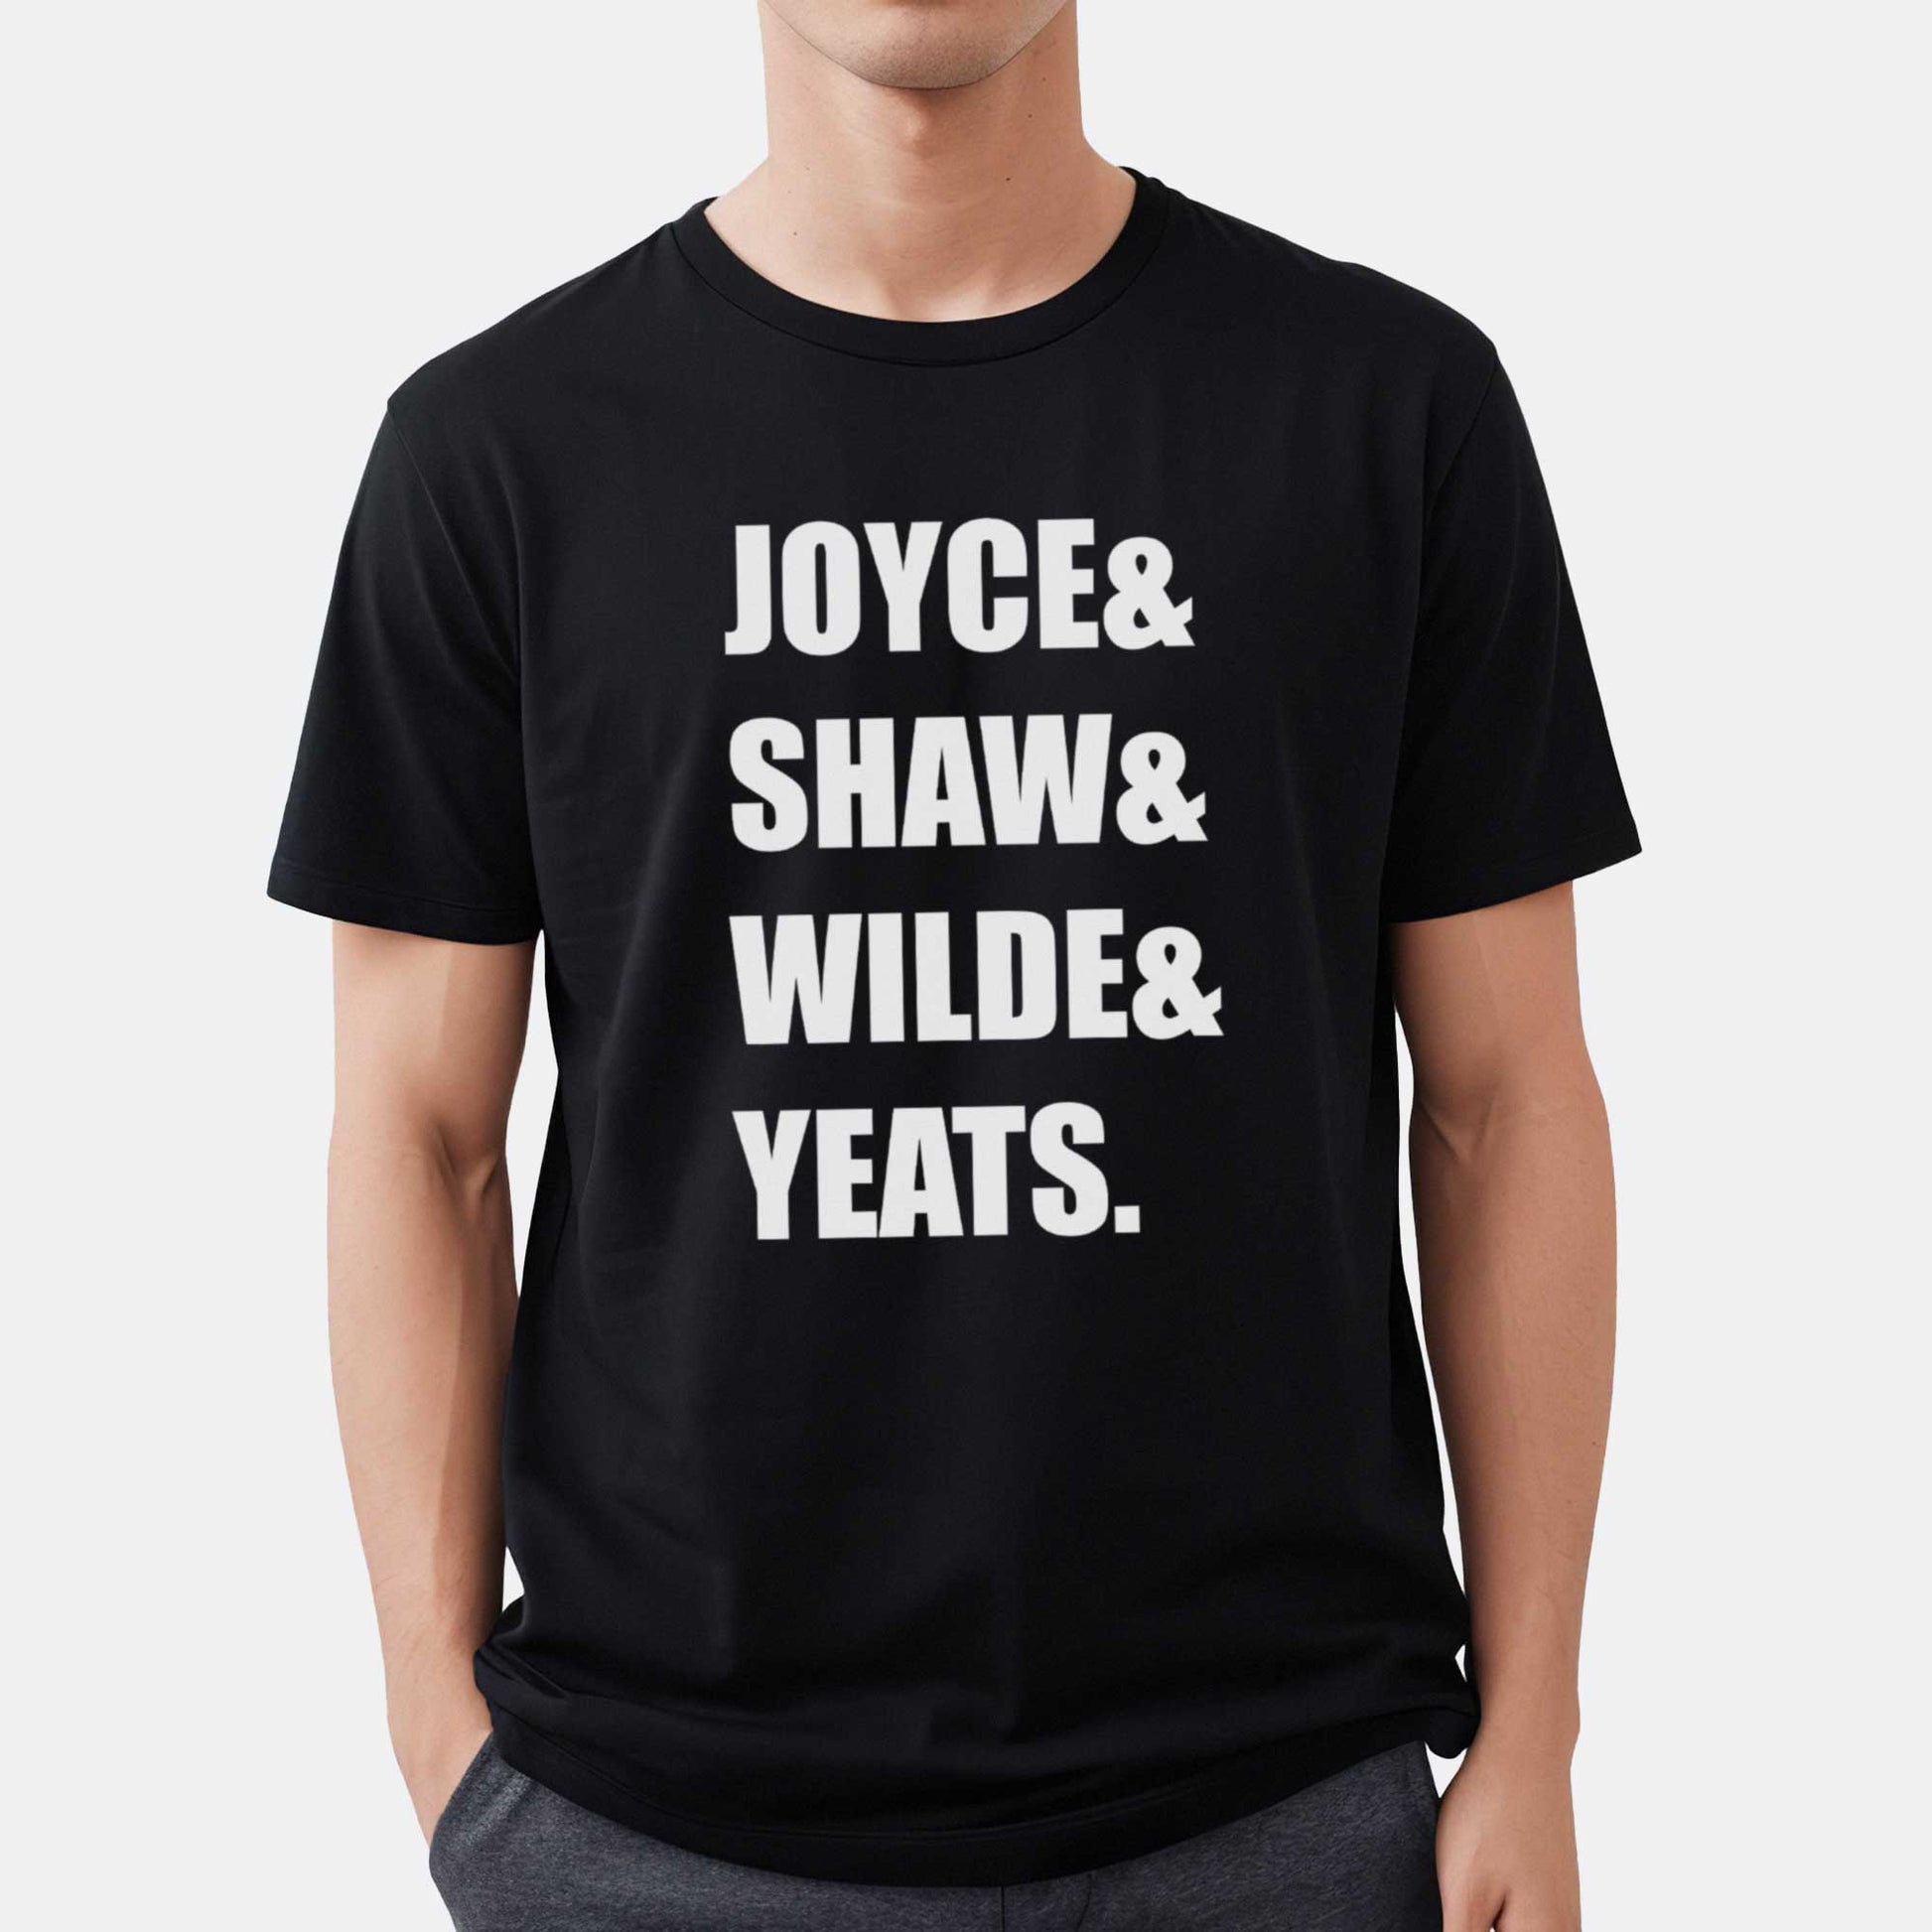 A man wearing a black Bella Canvas t-shirt featuring the last names of Irish writers Joyce, Shaw, Wilde and Yeats.